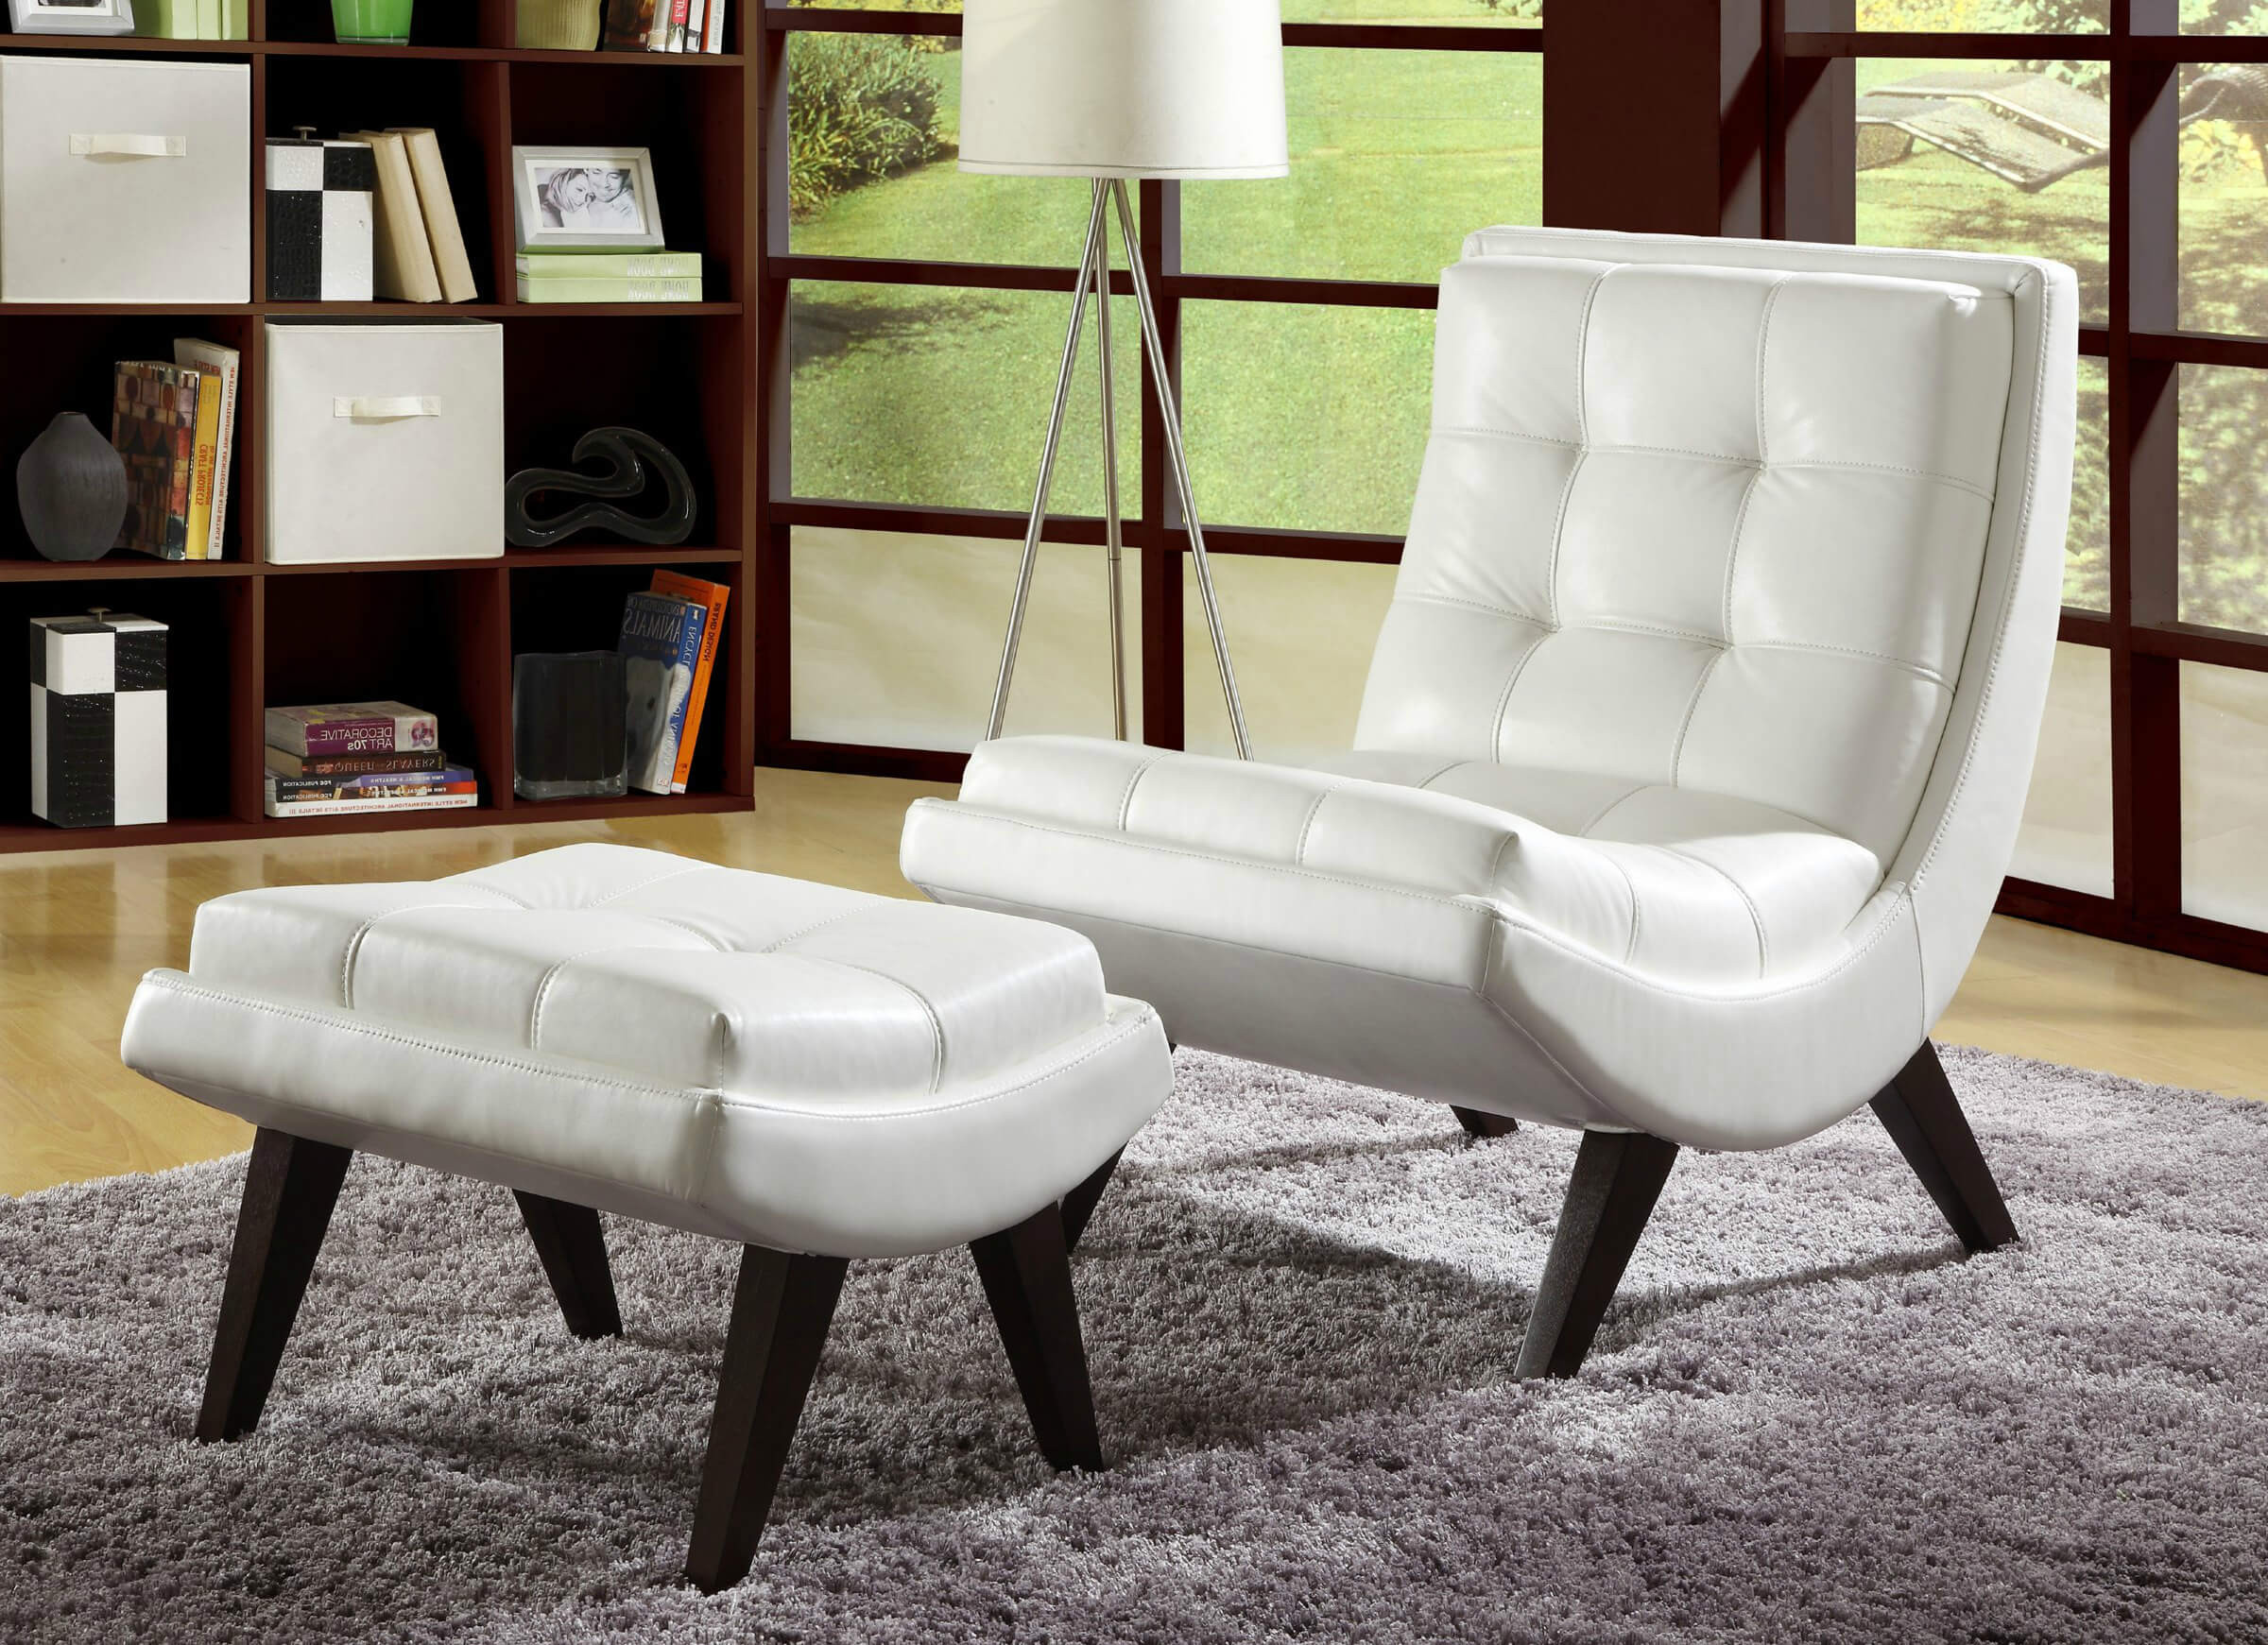 Occasional Chairs For Living Room
 37 White Modern Accent Chairs for the Living Room